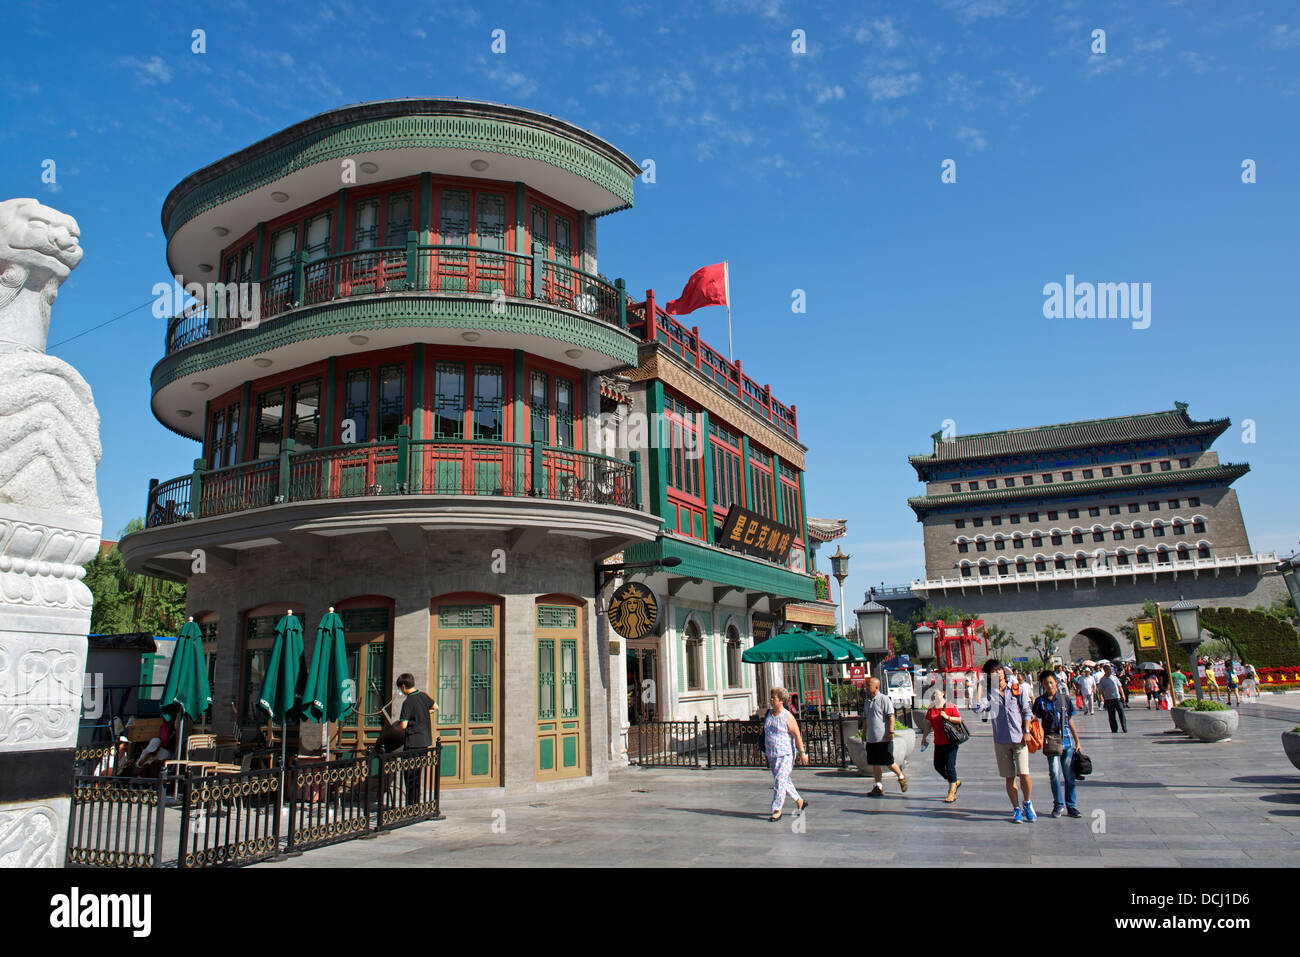 A Starbucks Coffeehouse at Qianmen Street in Beijing, China. 2013 Stock Photo